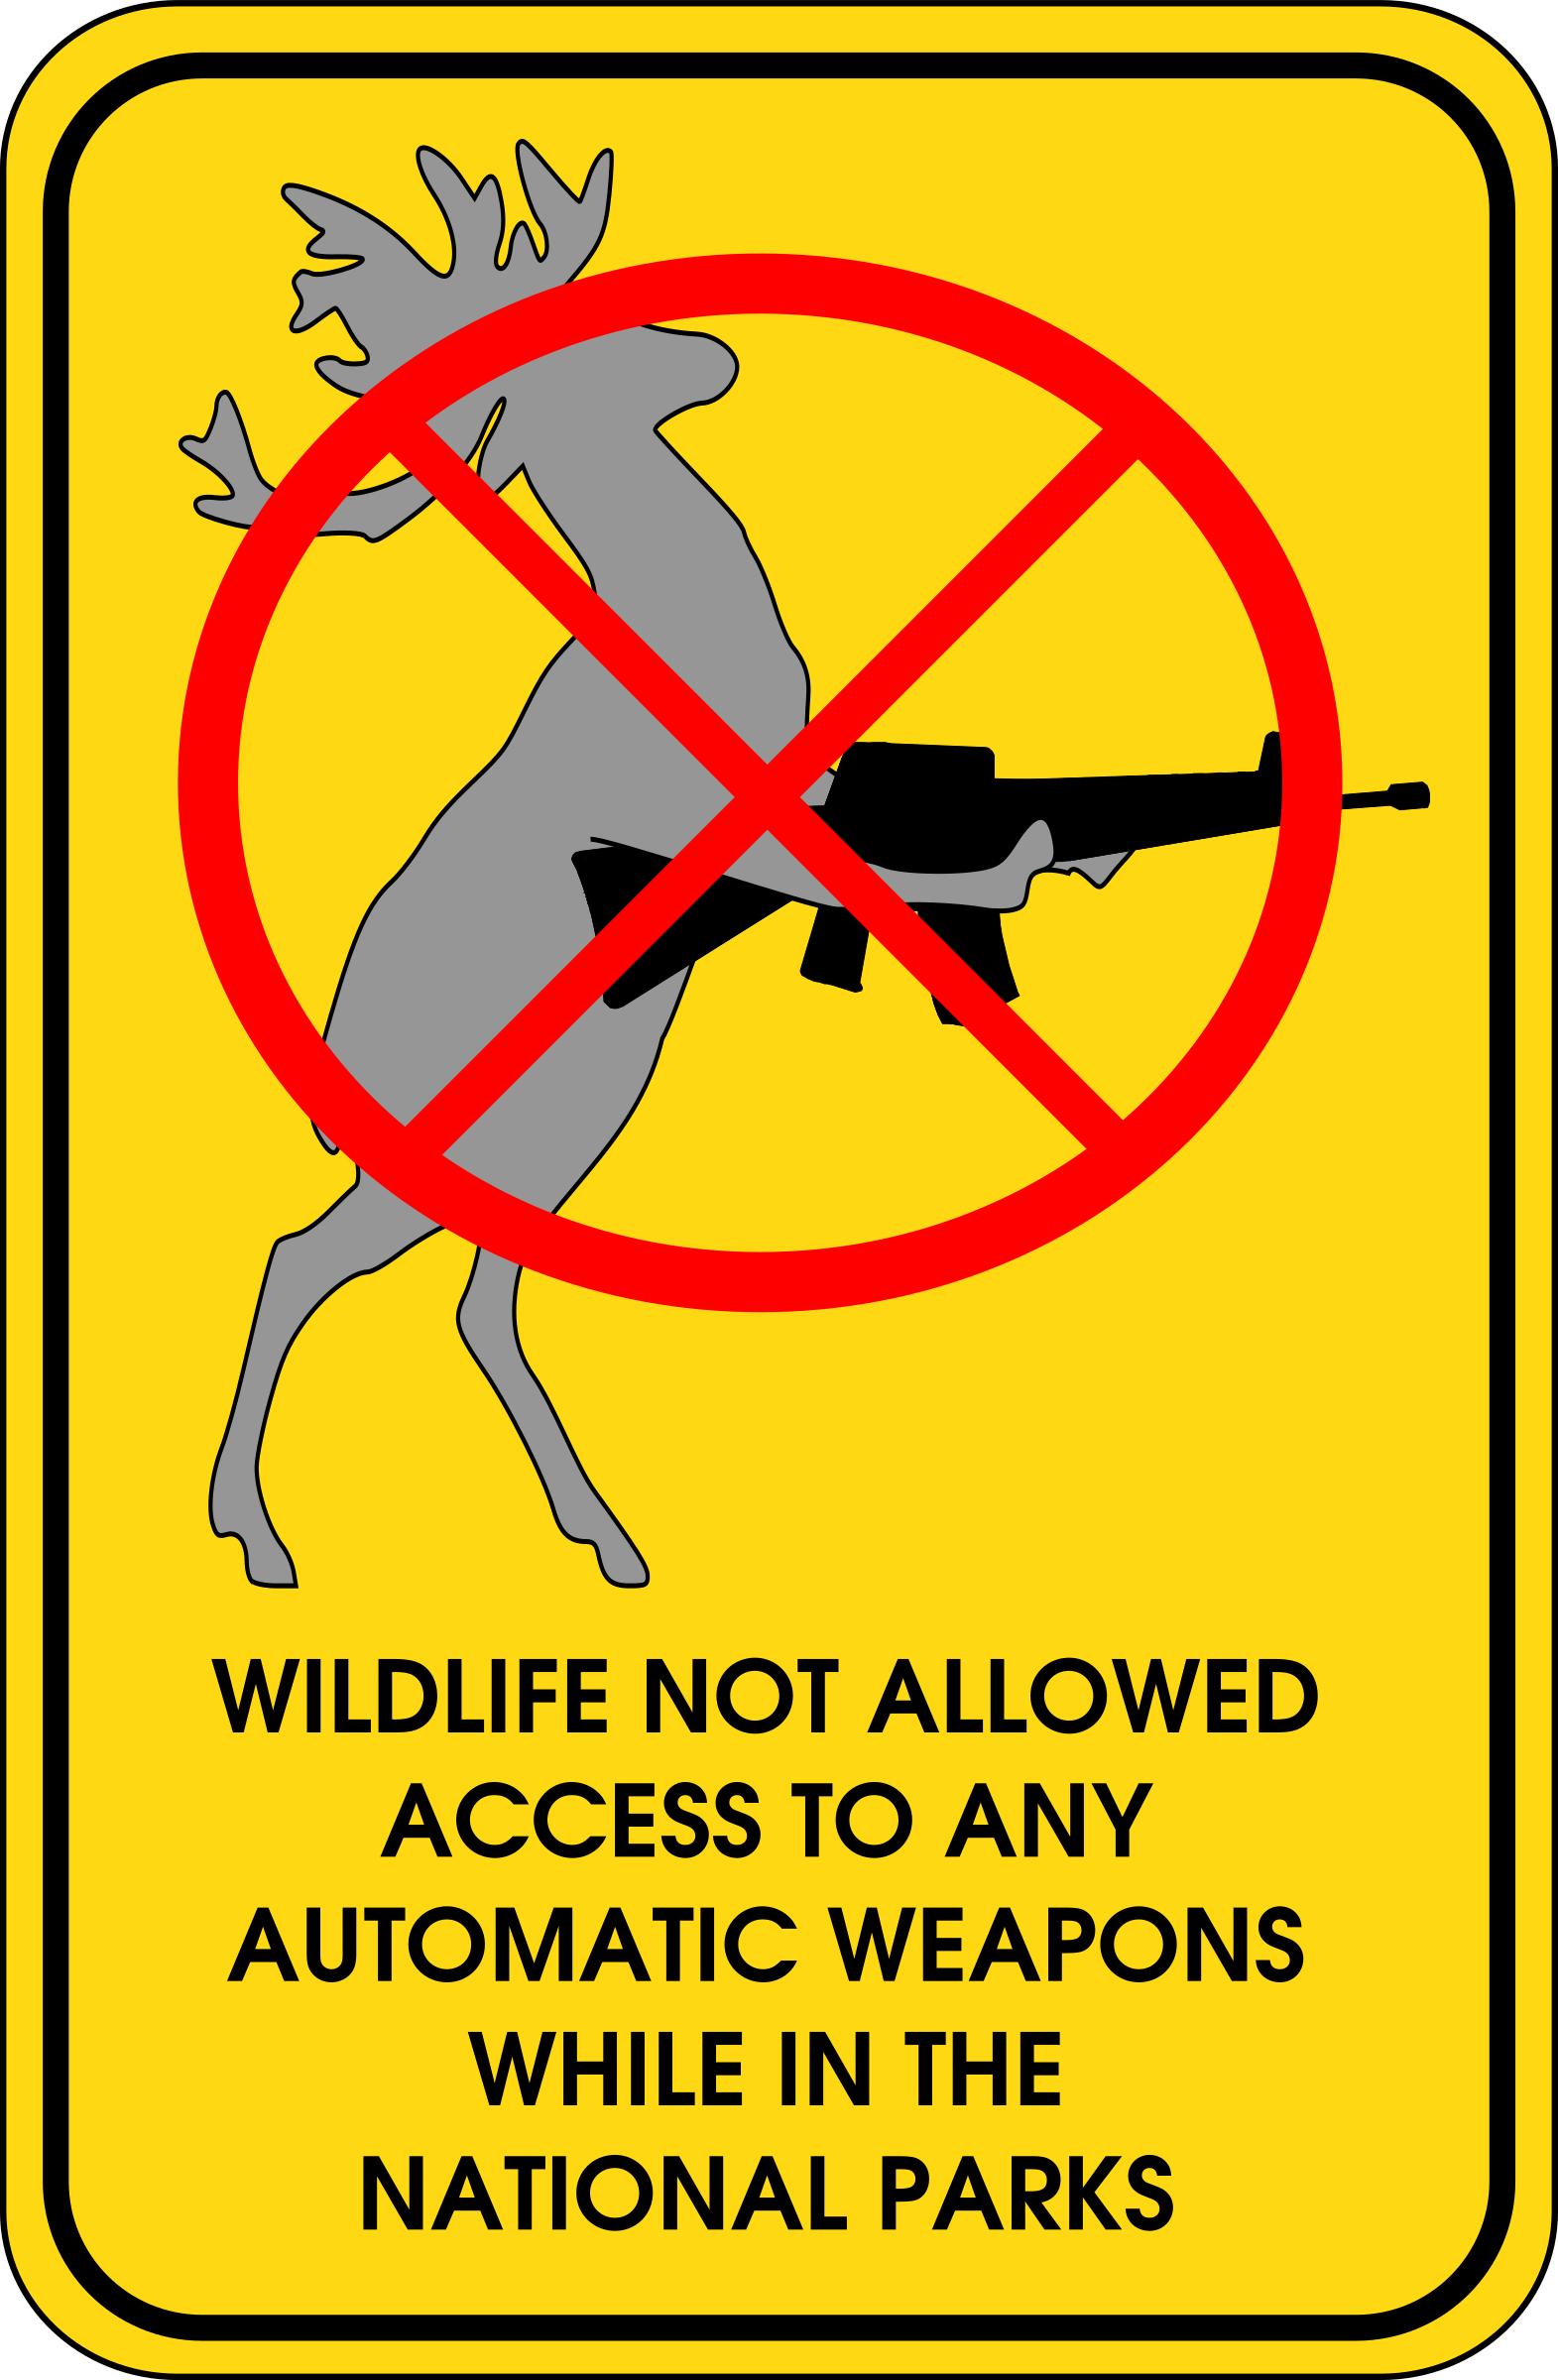 Wildlife Not Allowed To Access Automatic Weapons While In The National Parks png